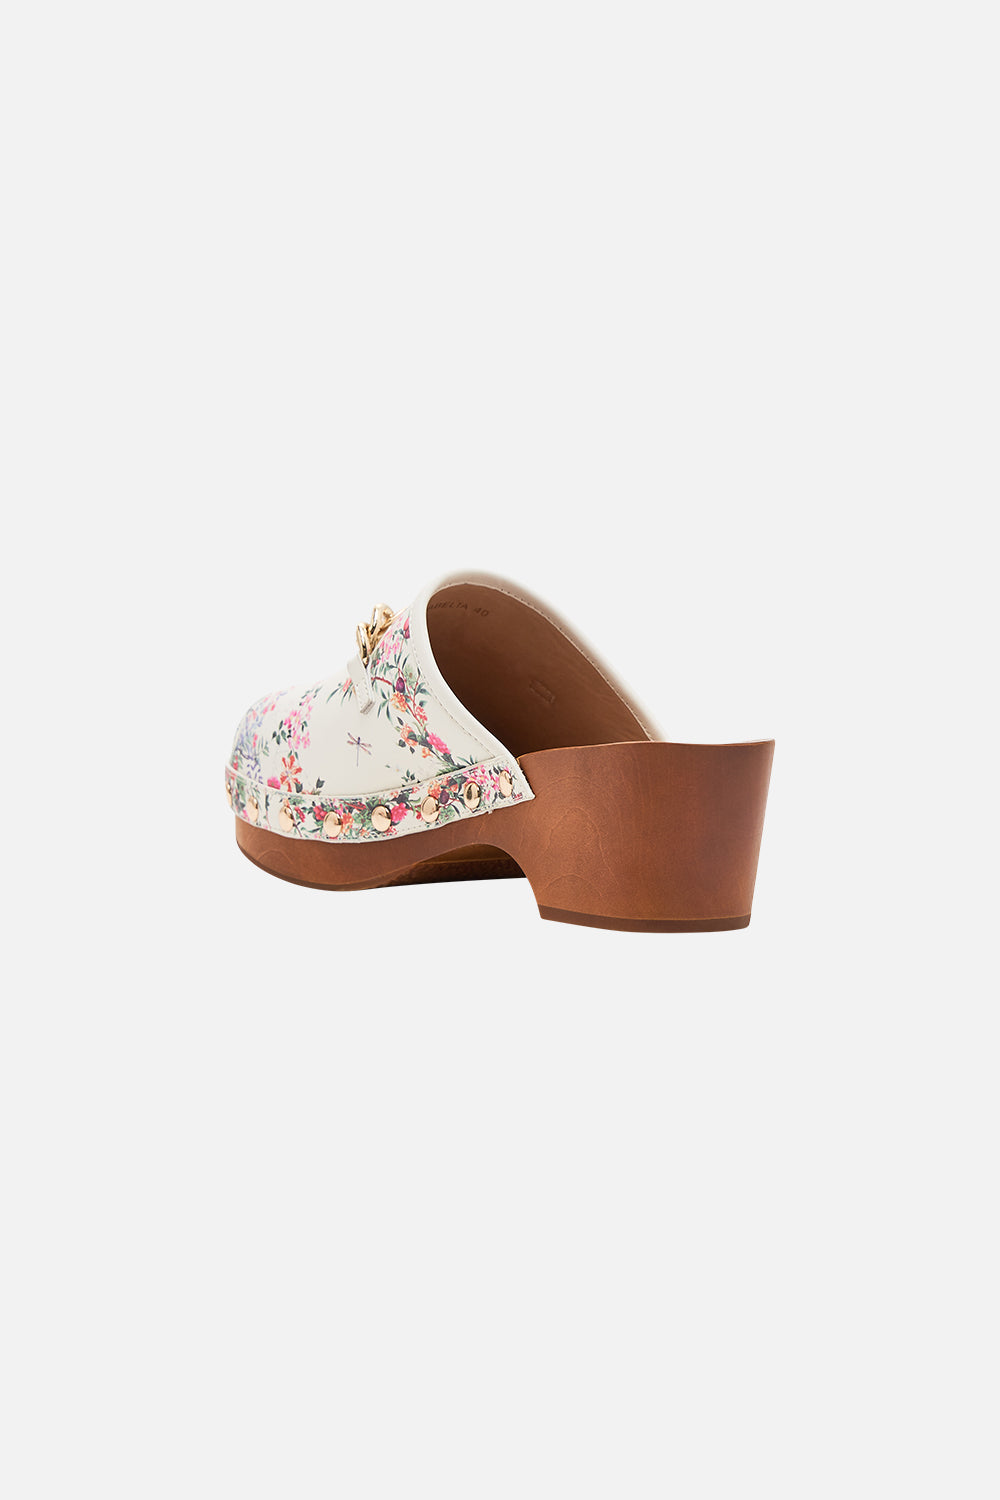 CAMILLA printed clogs in Plumes and Parterres print